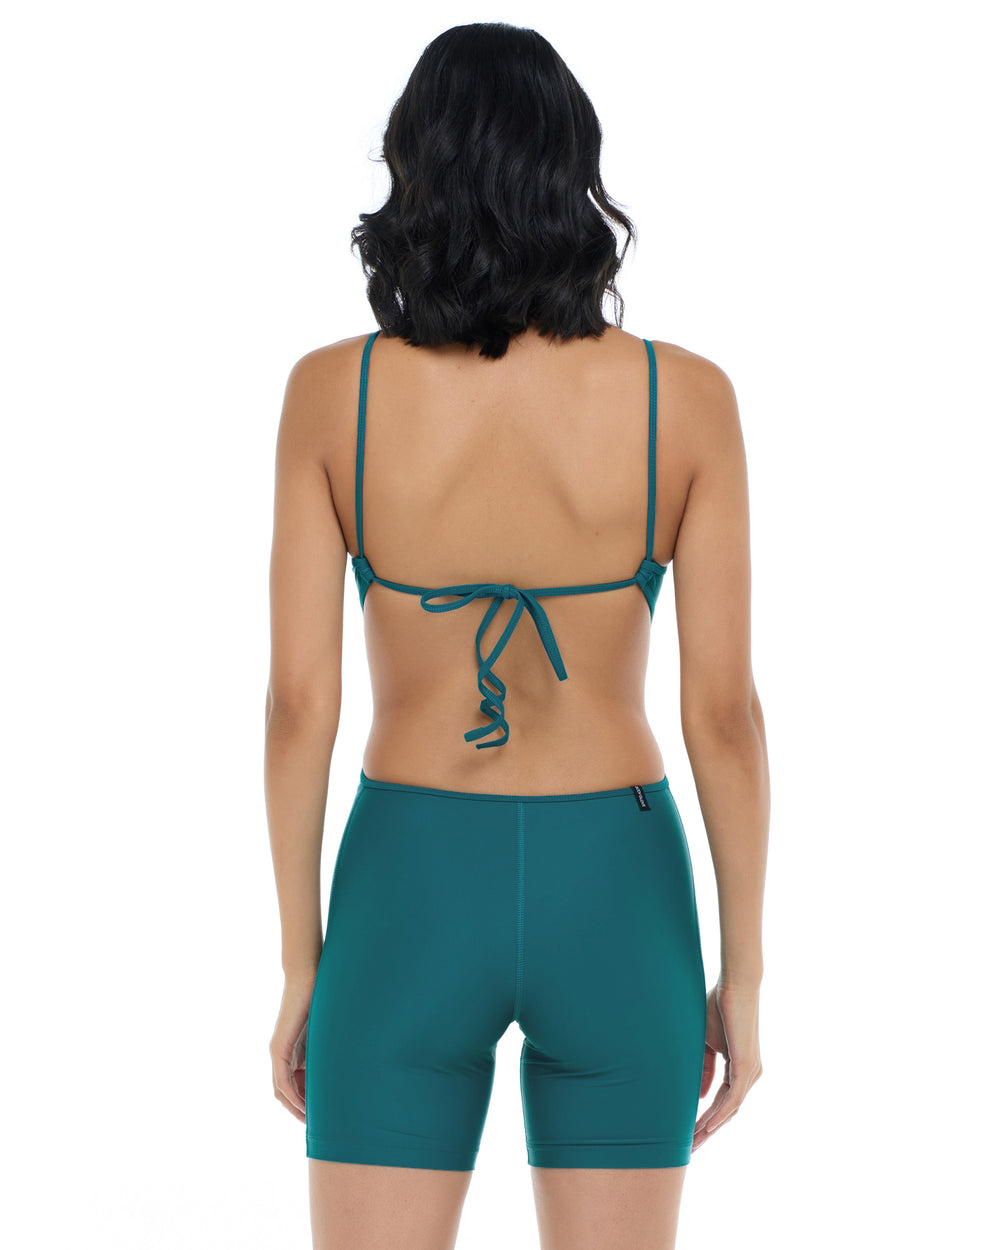 Smoothies Cadence One-Piece - Kingfisher